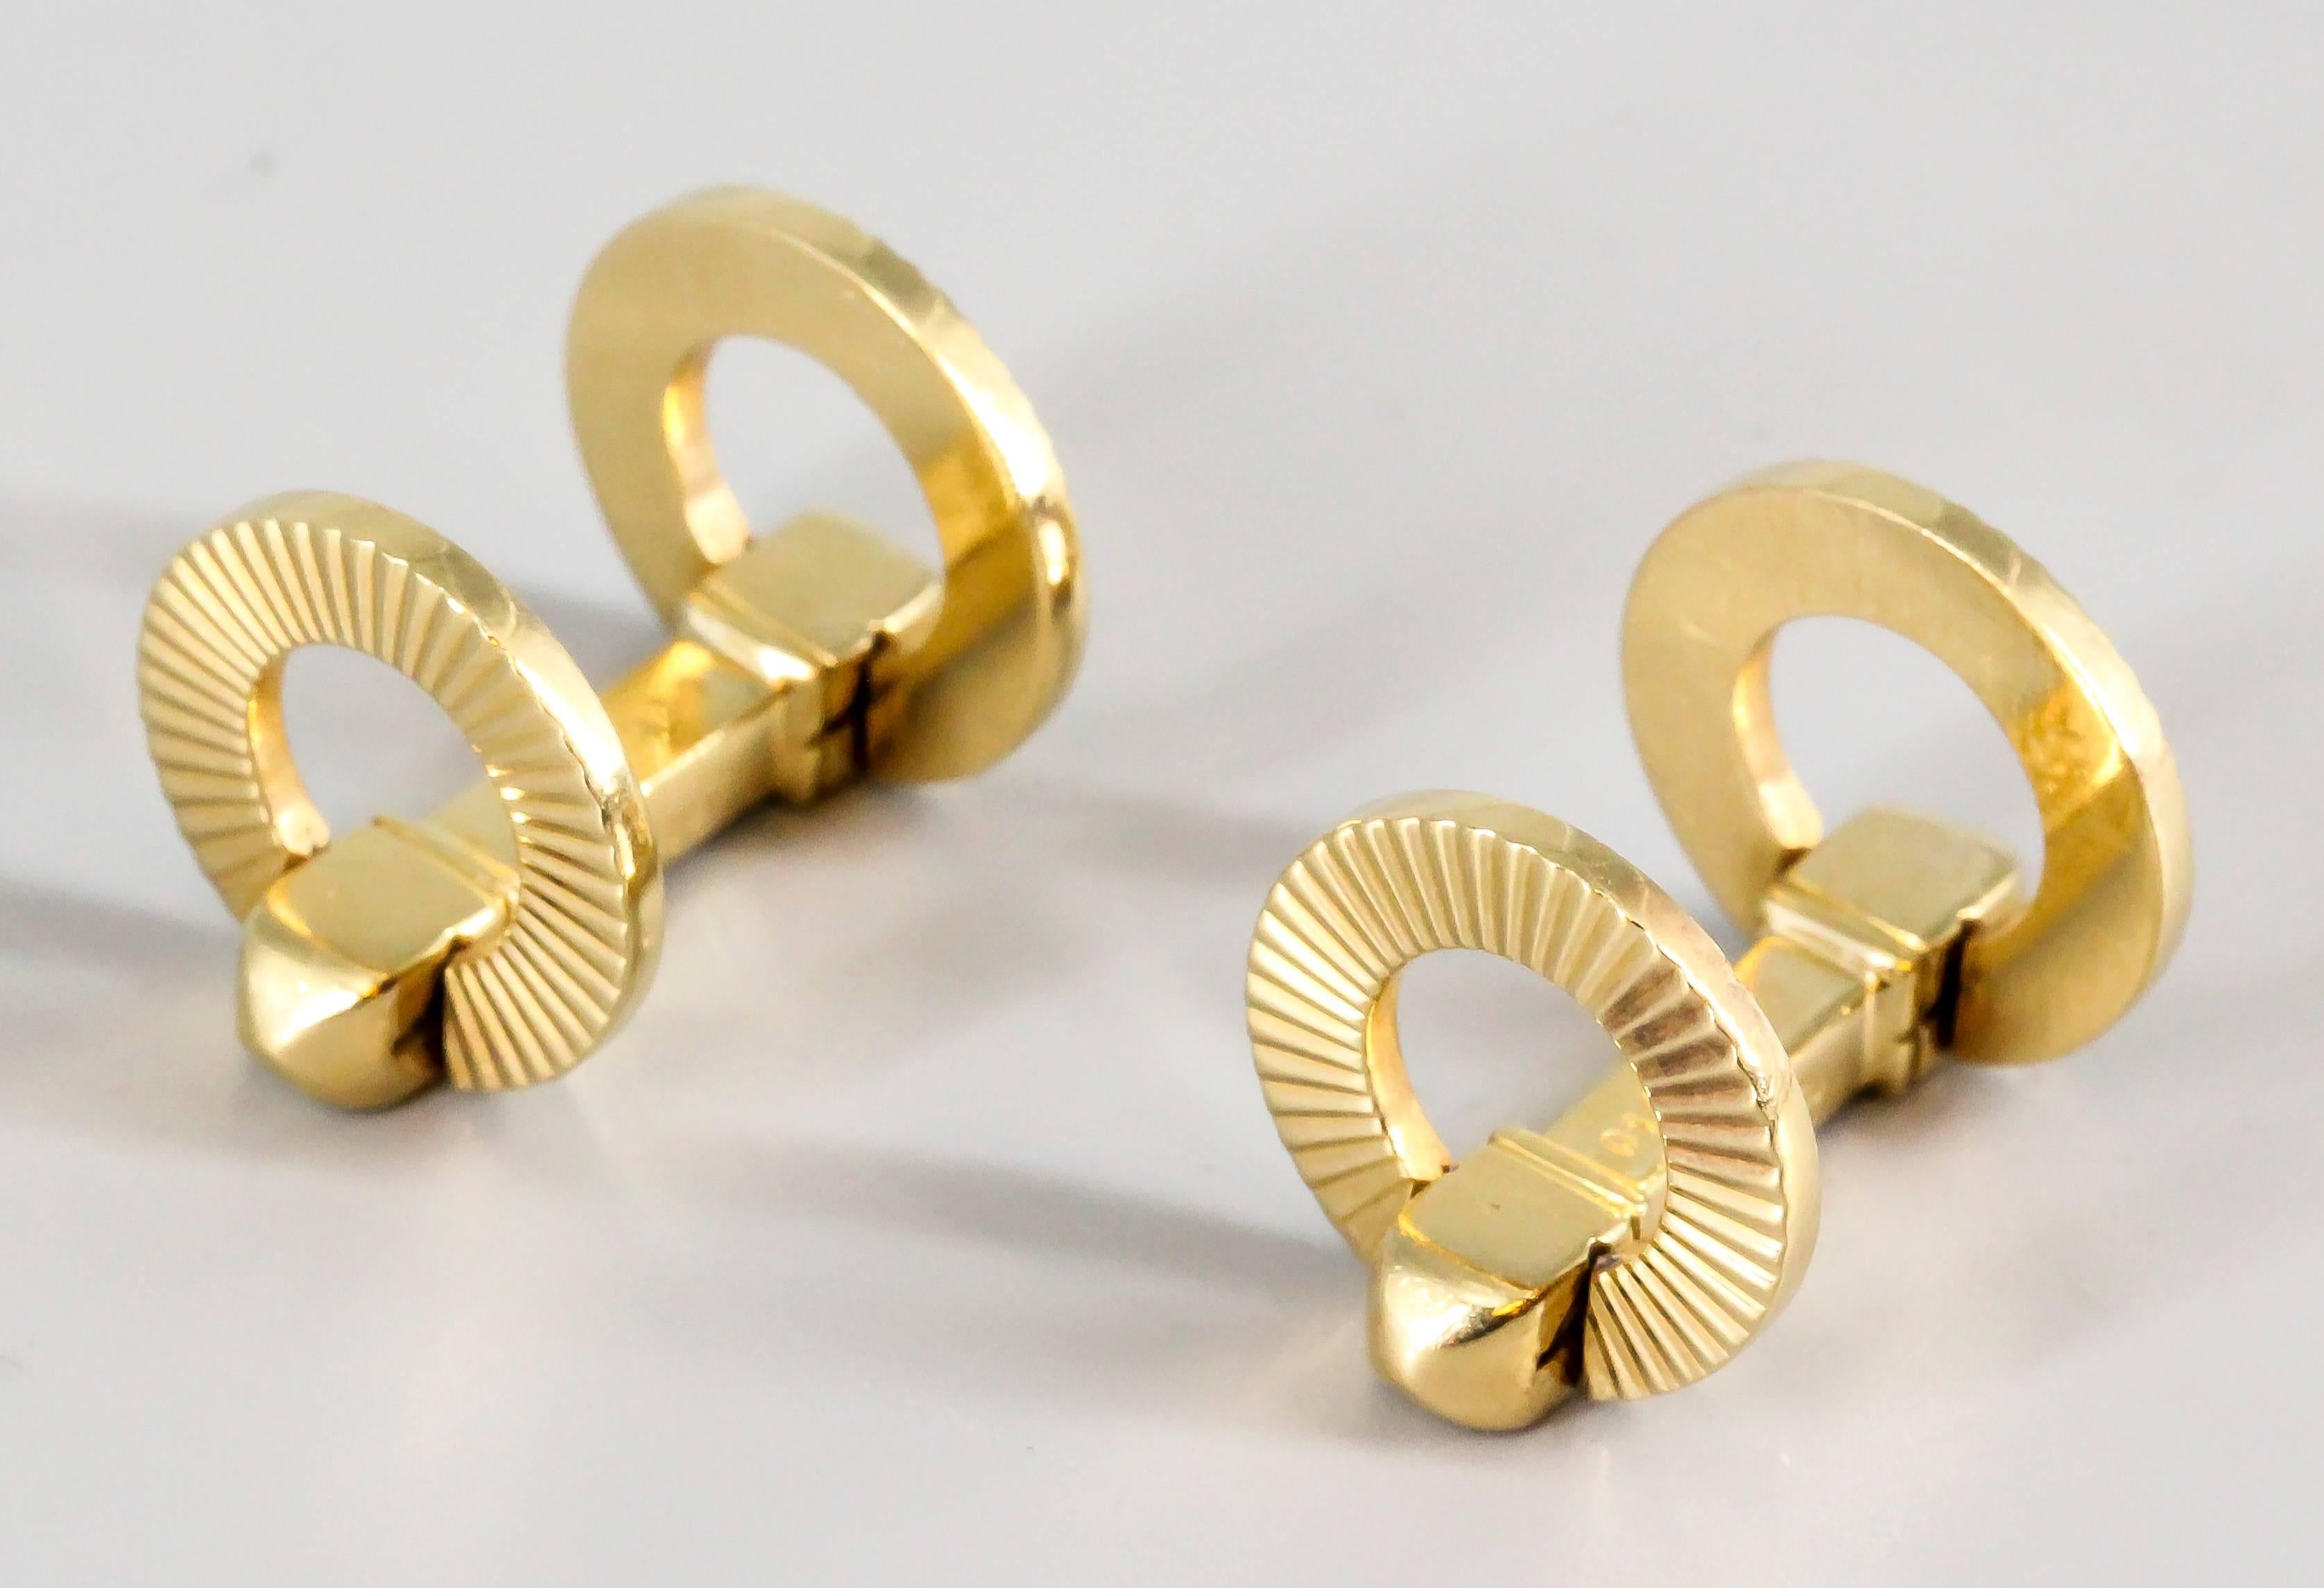 Handsome 18K yellow gold folding cufflinks by Cartier, circa 1950s. They feature a folding mechanism and have a circular coin-edged ribbed design, the opposite side has a polish gold design, either can be used can alternatively. 
Excellent make and